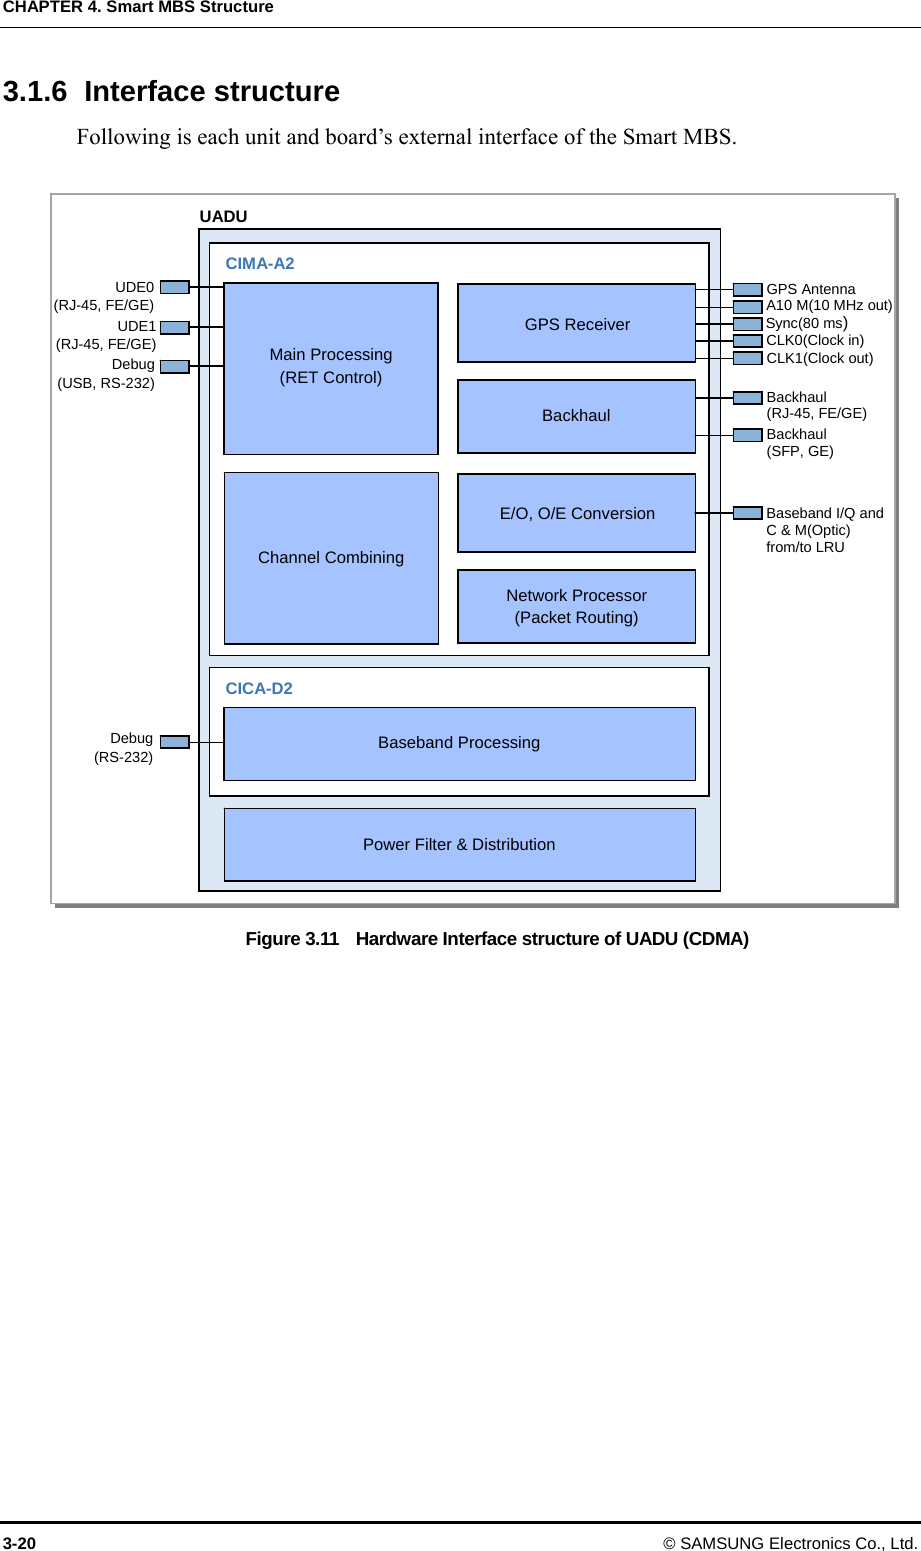 CHAPTER 4. Smart MBS Structure 3-20 © SAMSUNG Electronics Co., Ltd. 3.1.6 Interface structure Following is each unit and board’s external interface of the Smart MBS.  Figure 3.11    Hardware Interface structure of UADU (CDMA)  UDE0 (RJ45, FE/GE) UDE1 (RJ45, FE/GE)  CIMA-A2   GPS ReceiverBackhaulUADU Debug (USB, RS-232) Debug (RS-232) GPS Antenna CLK1(Clock out) Backhaul (RJ-45, FE/GE) Backhaul (SFP, GE)  Channel Combining   E/O, O/E ConversionNetwork Processor (Packet Routing) CICA-D2  Power Filter &amp; DistributionCLK0(Clock in) A10 M(10 MHz out) Sync(80 ms) Baseband I/Q and C &amp; M(Optic) from/to LRU  Main Processing (RET Control)  Baseband Processing UDE0  (RJ-45, FE/GE) UDE1  (RJ-45, FE/GE) 